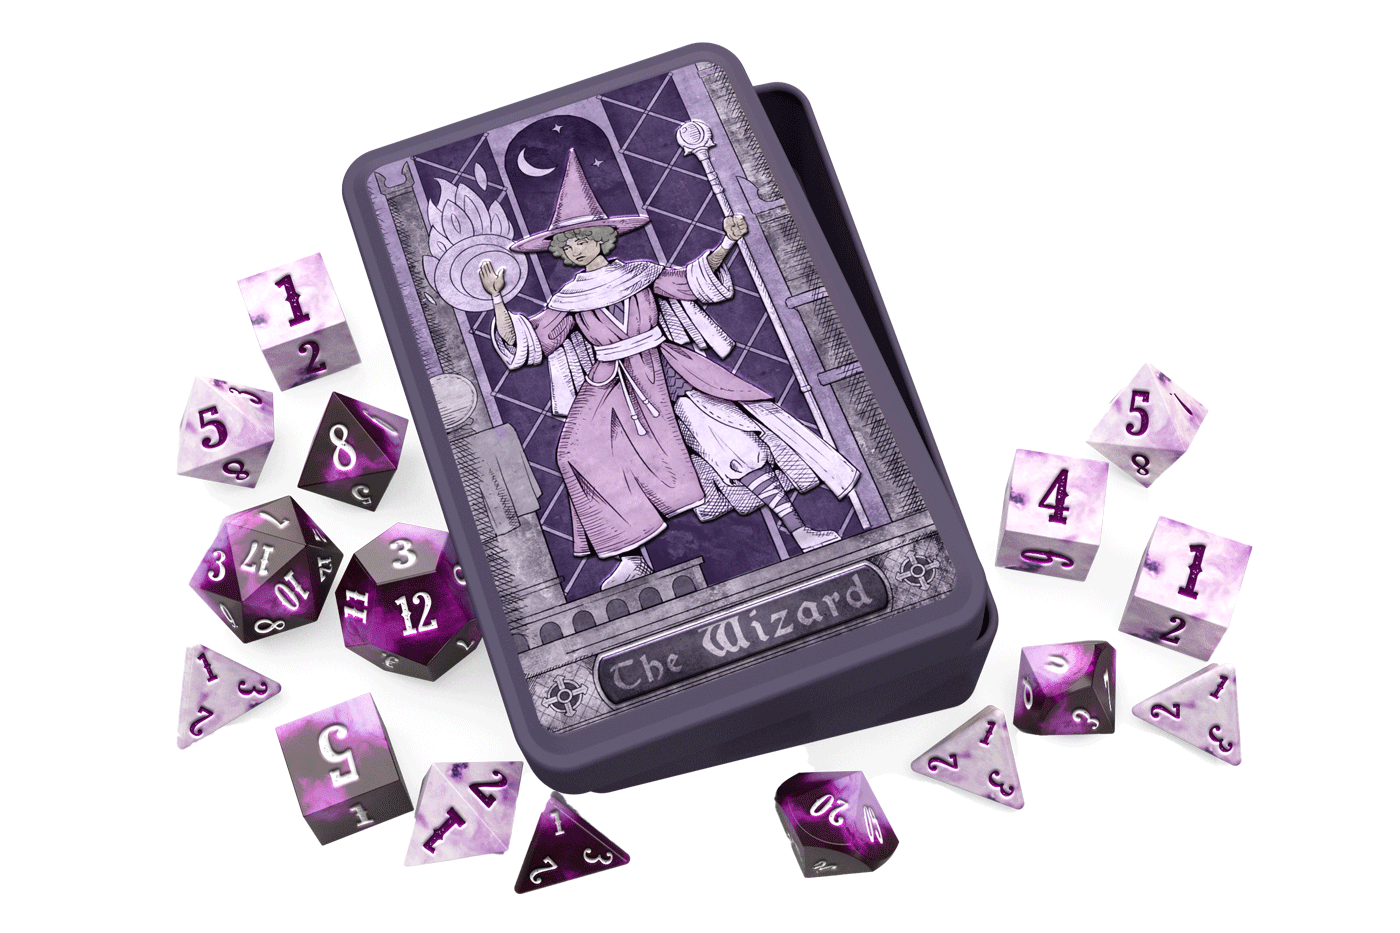 Beadle and Grimm's Wizard Dice Tin. A dice tin inspired by the Wizard class with an illustration of a robed wizard with a staff in one hand and summoning a fireball with the other The tin is surrounded by light and dark purple dice.